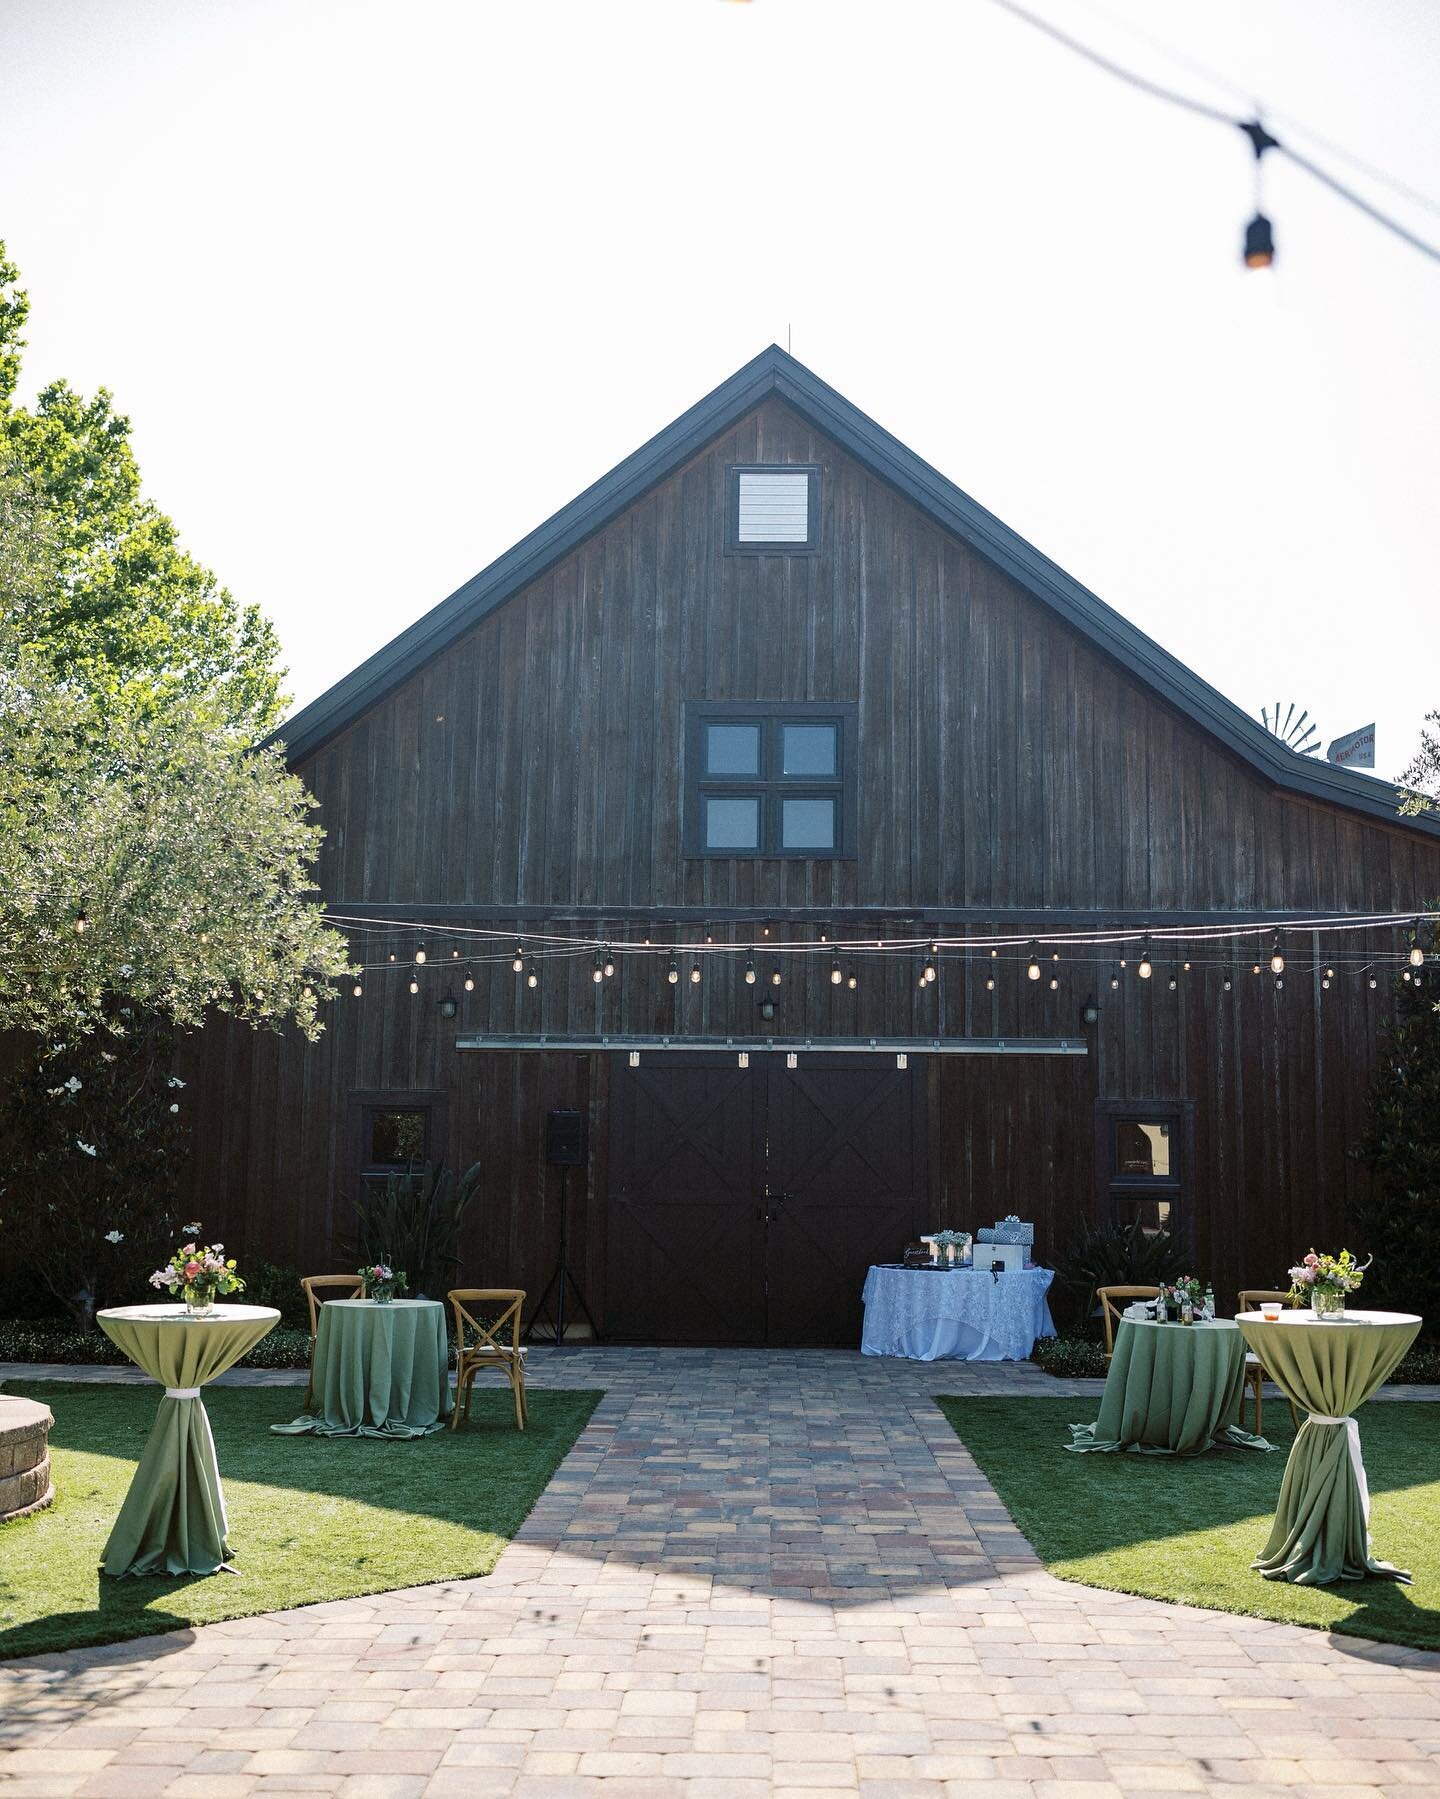 Finding the right wedding venue takes a lot of time and research and can often
be one of the hardest parts of planning a wedding. You need to make sure that your venue checks all the right boxes before you sign on the dotted line, so here are a few i